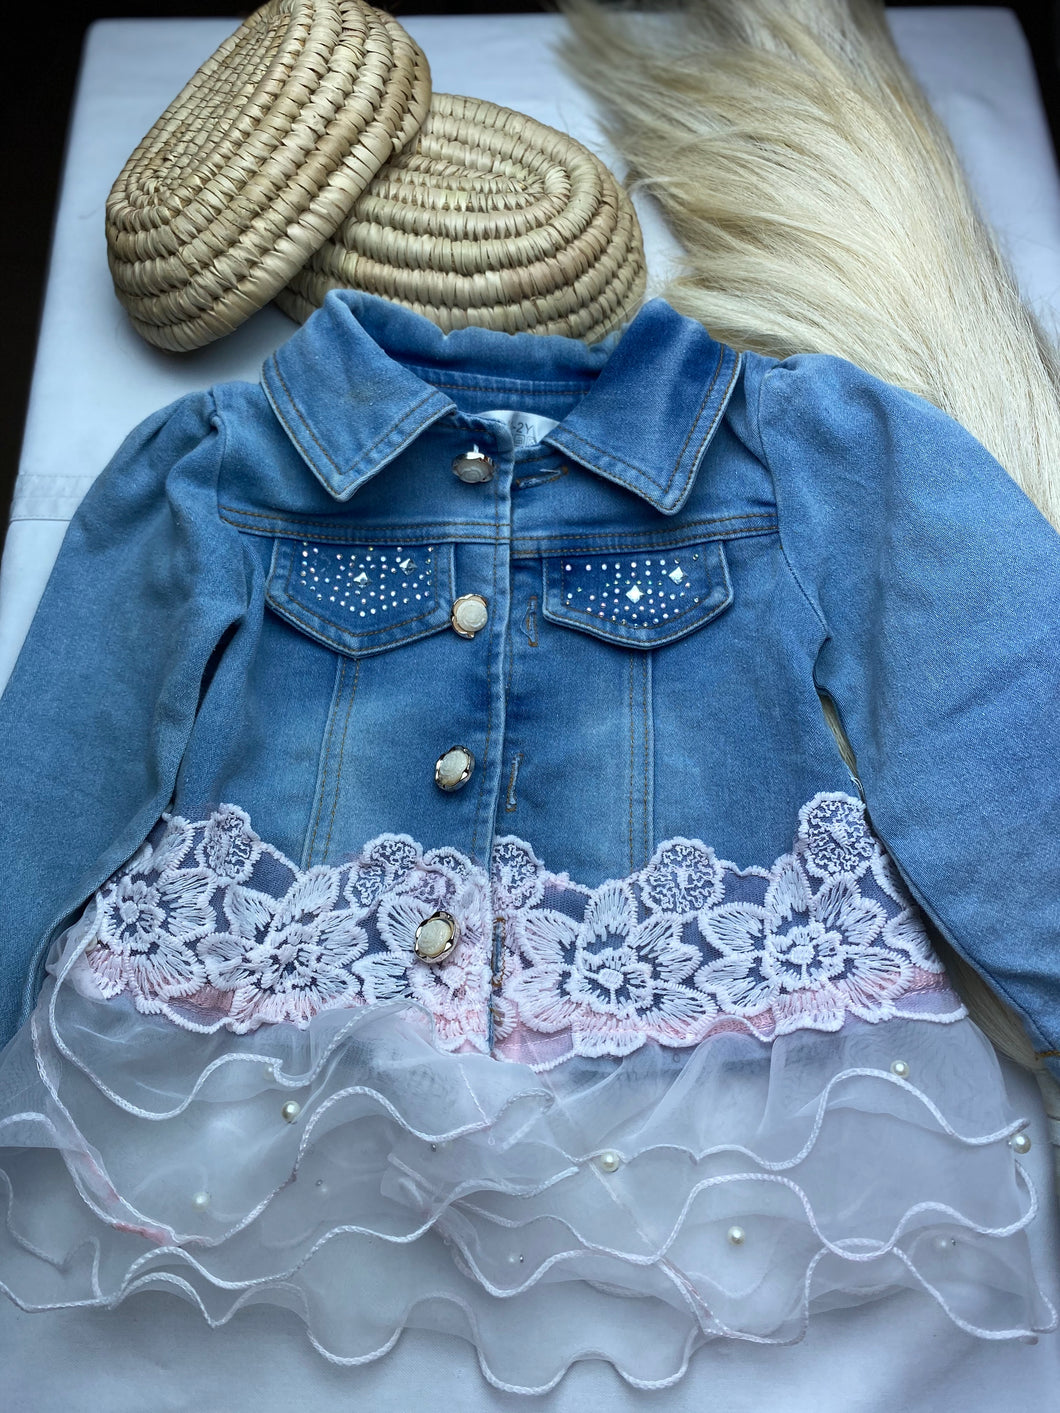 Denim Jeans suit with pink highlights for Girls - 2 to 5 years old